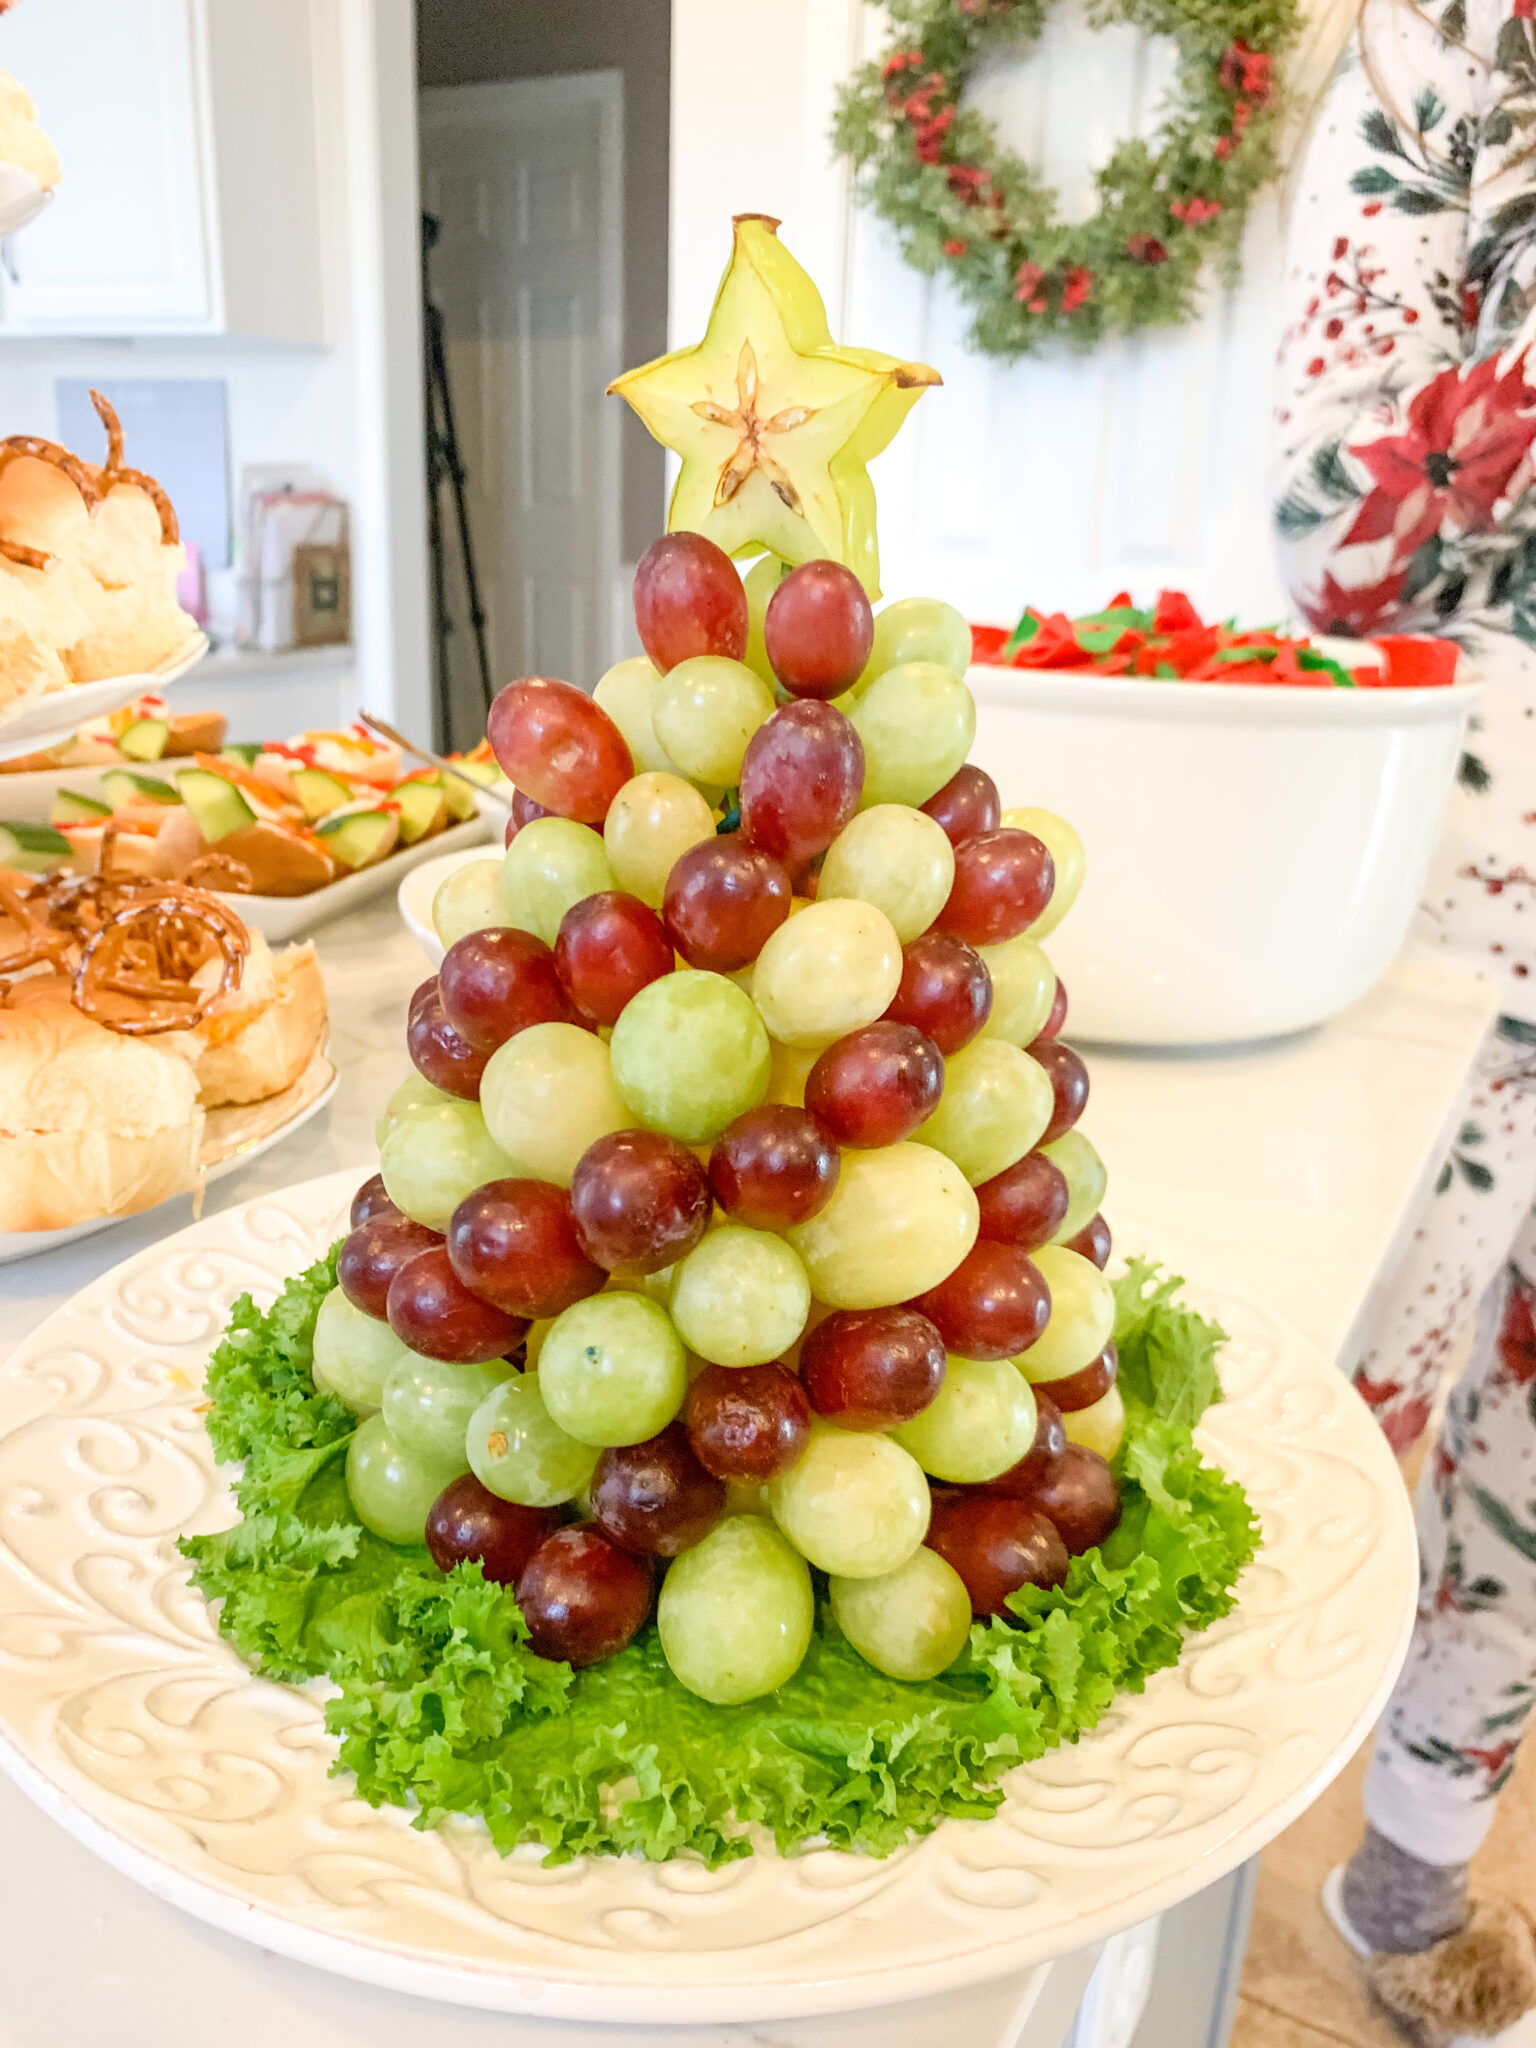 HOLIDAY HOMEMAKING W/ ME!  CHRISTMAS PARTY FOOD IDEAS